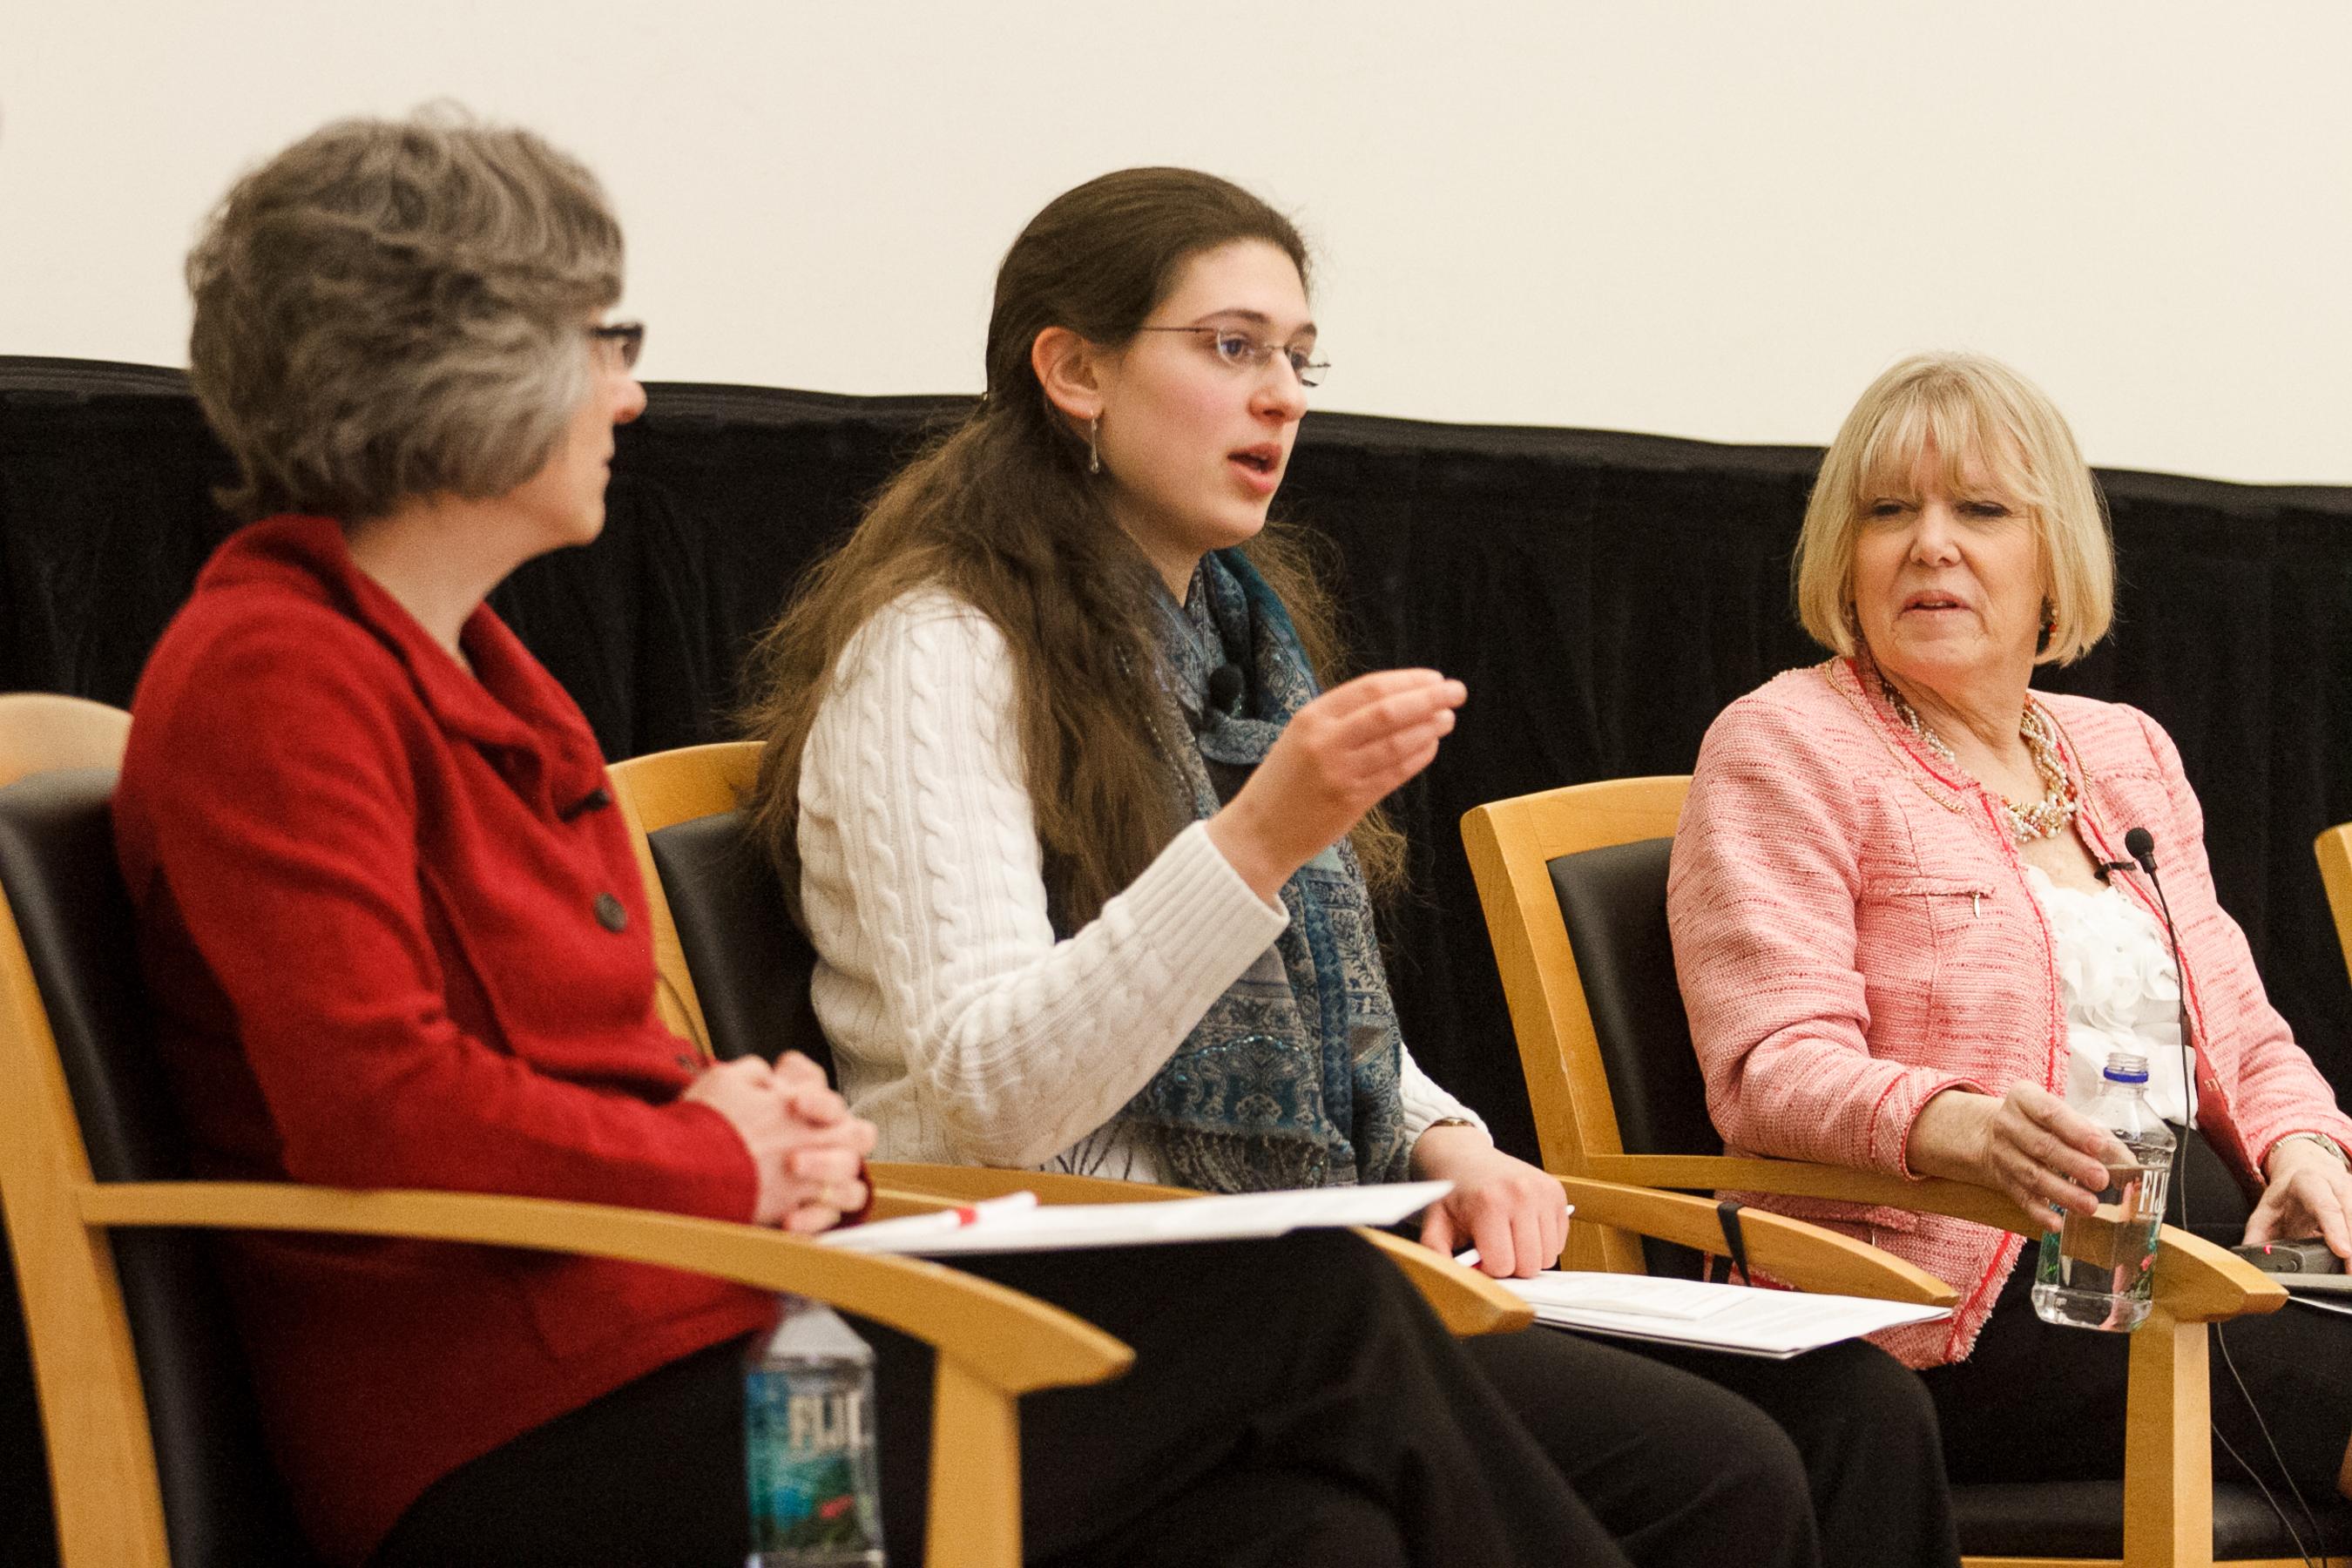 panel discussion dissects women's progress